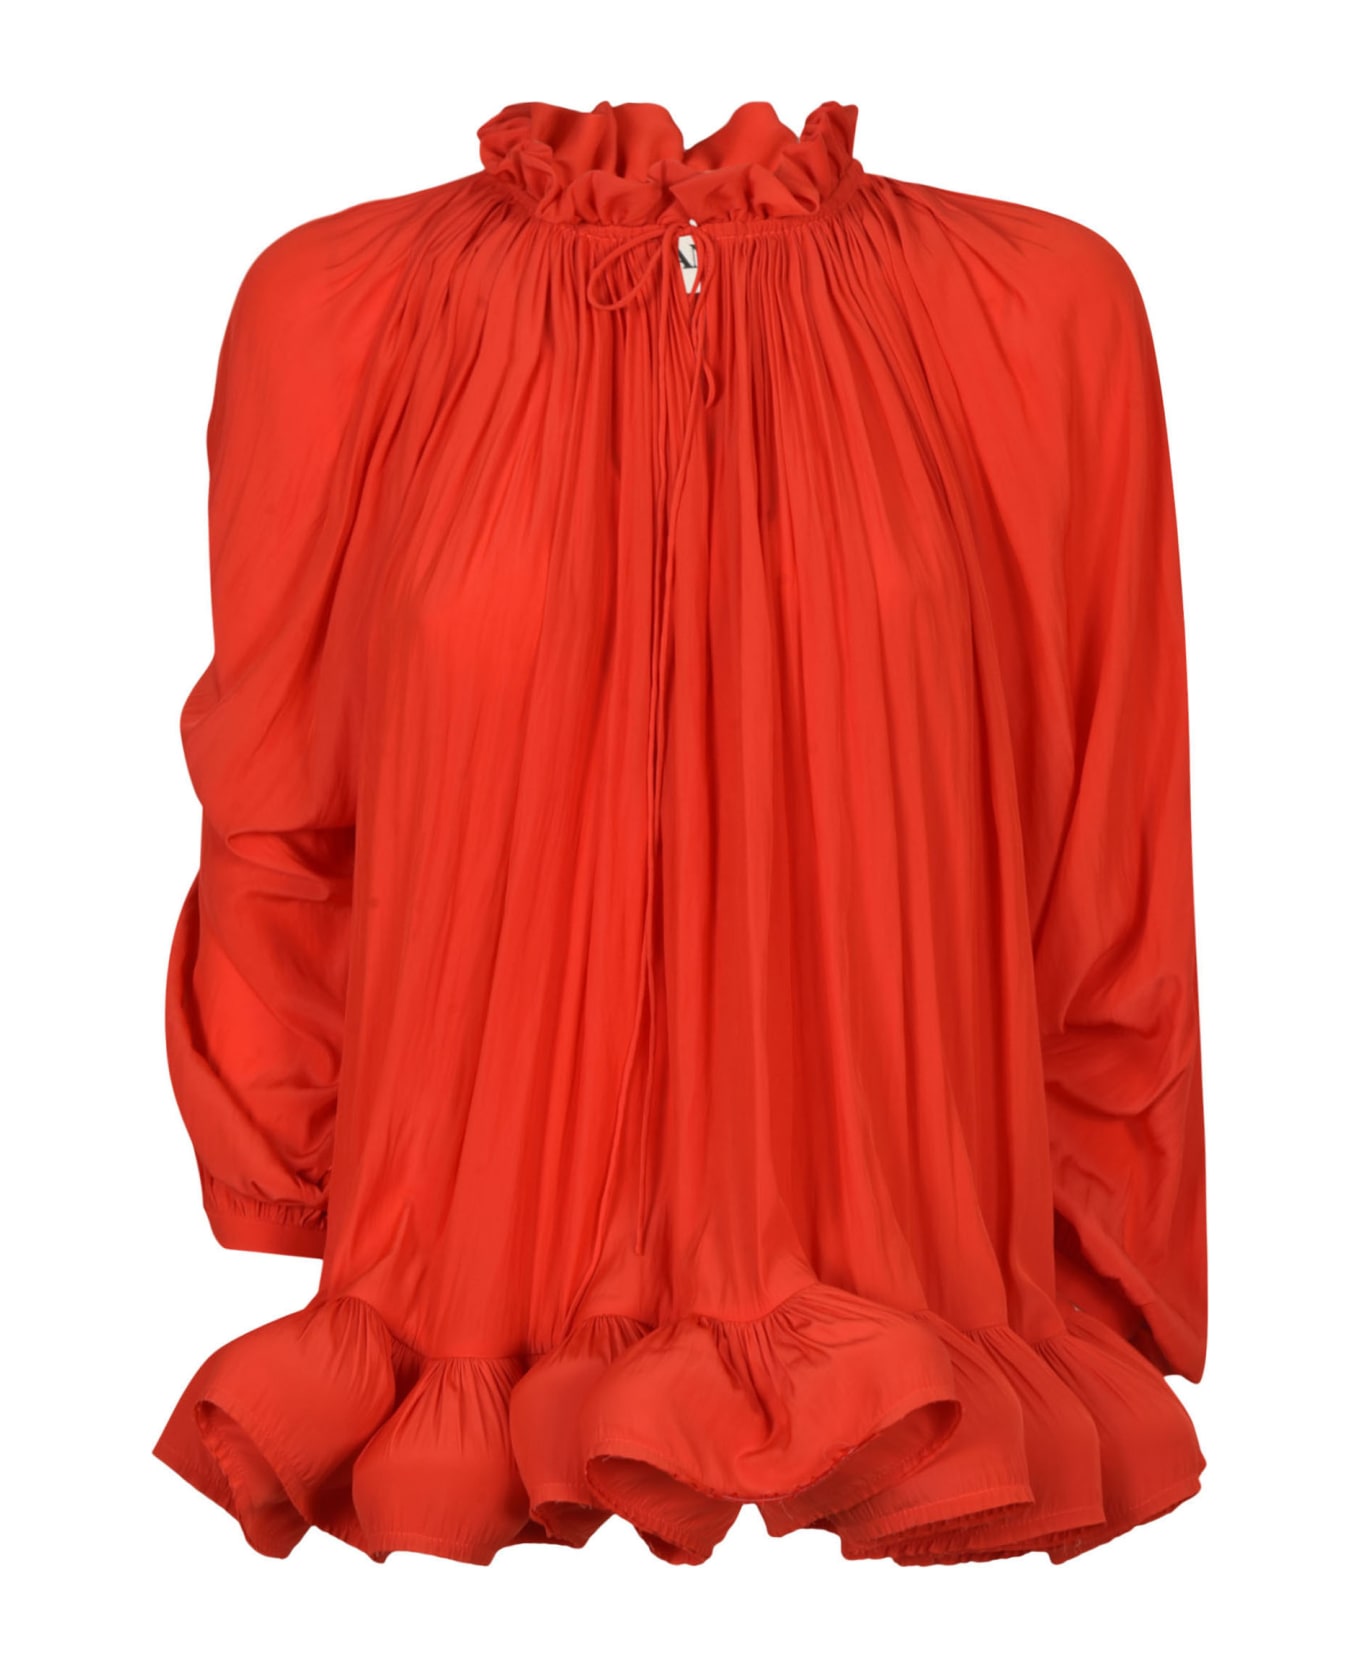 Lanvin Ruffle Detail Long-sleeved Top - Poppy Red